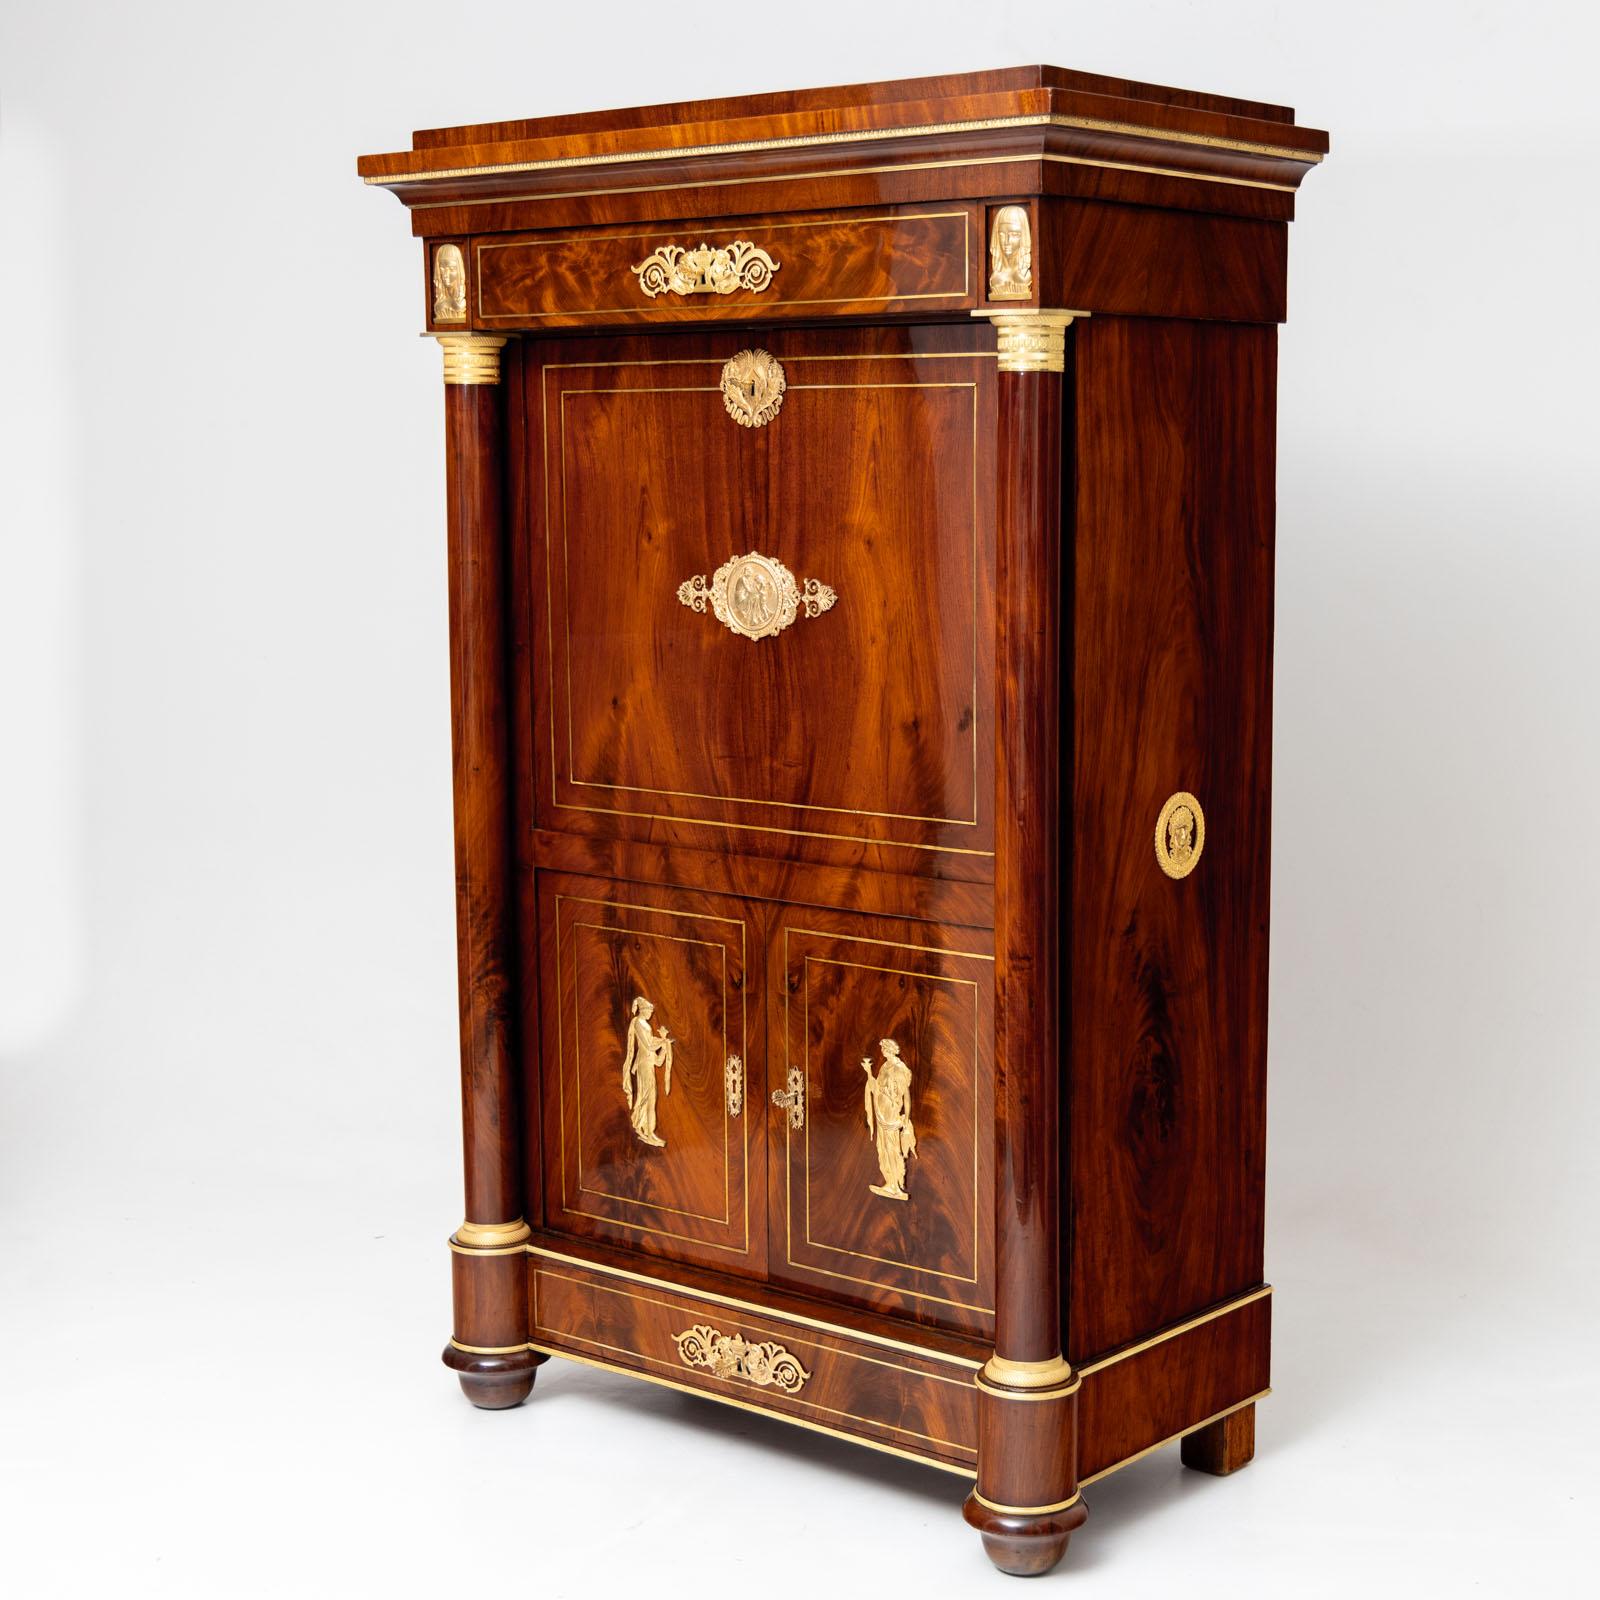 French Empire secretary à abattant with a two-door base, two wide drawers and a flat writing flap surrounded by smooth full columns with fire-gilt bronze capitals and bases. The bureau is veneered in mahogany and elegantly accentuated by fine